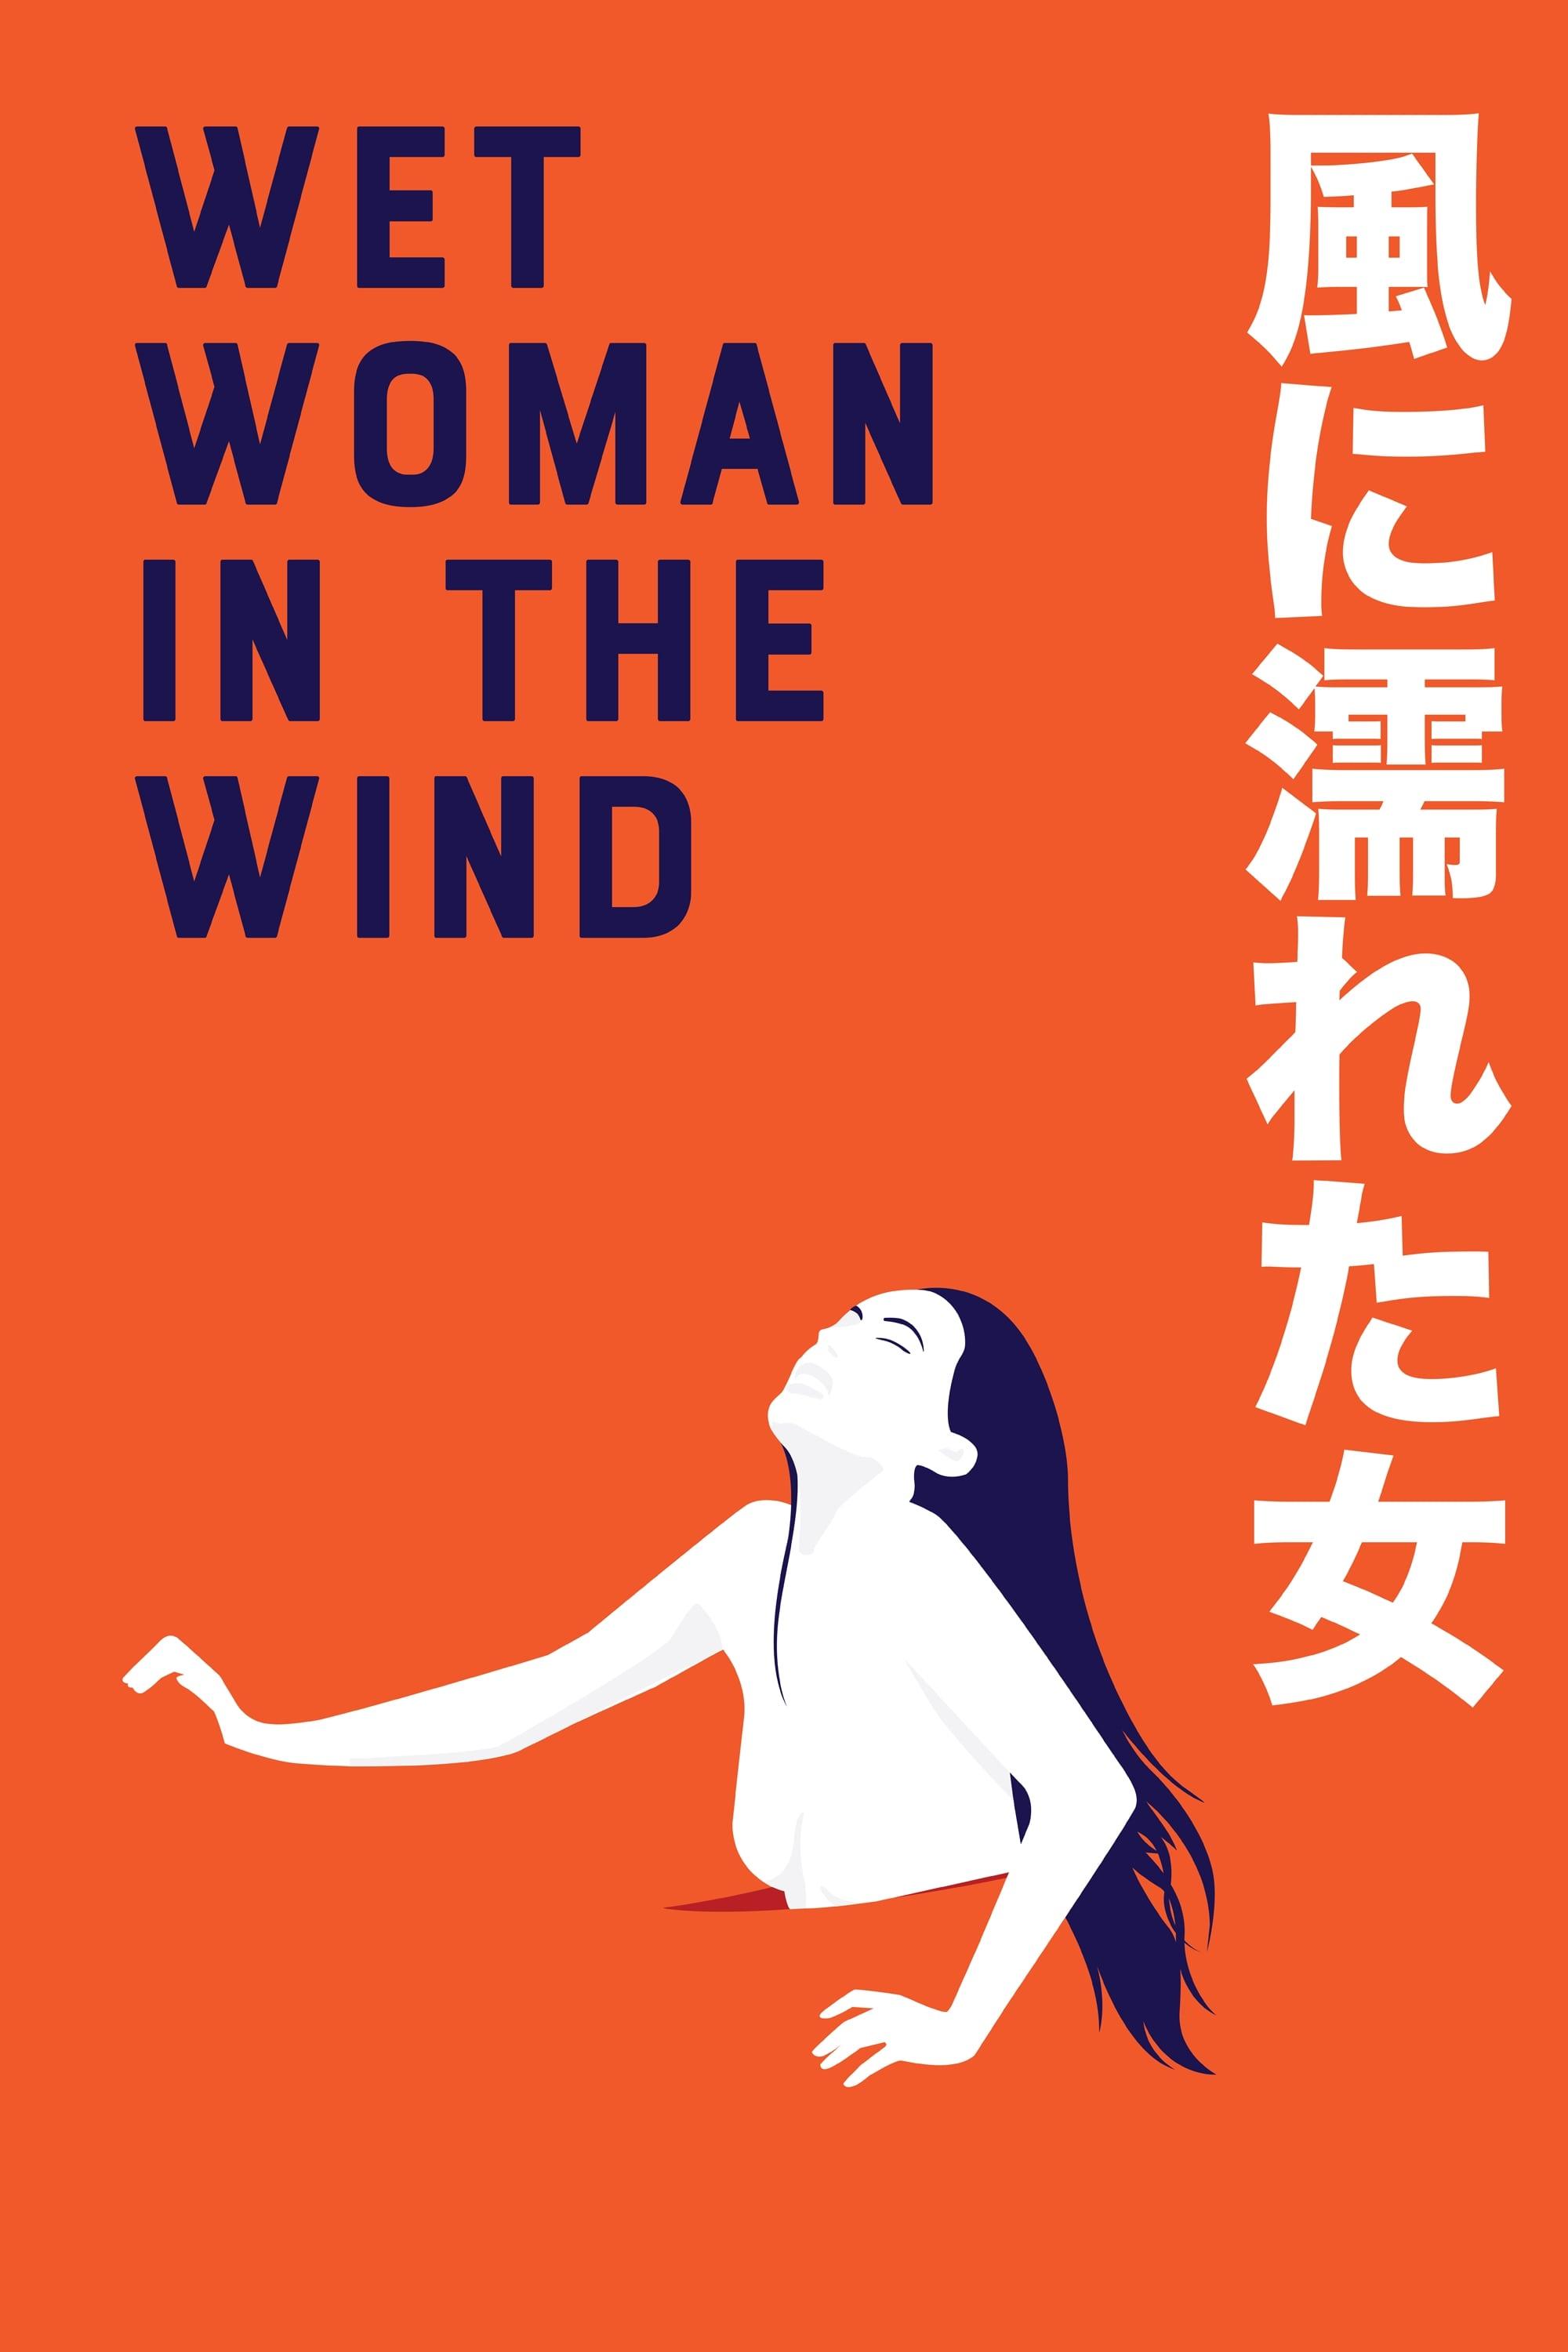 Wet Woman in the Wind poster